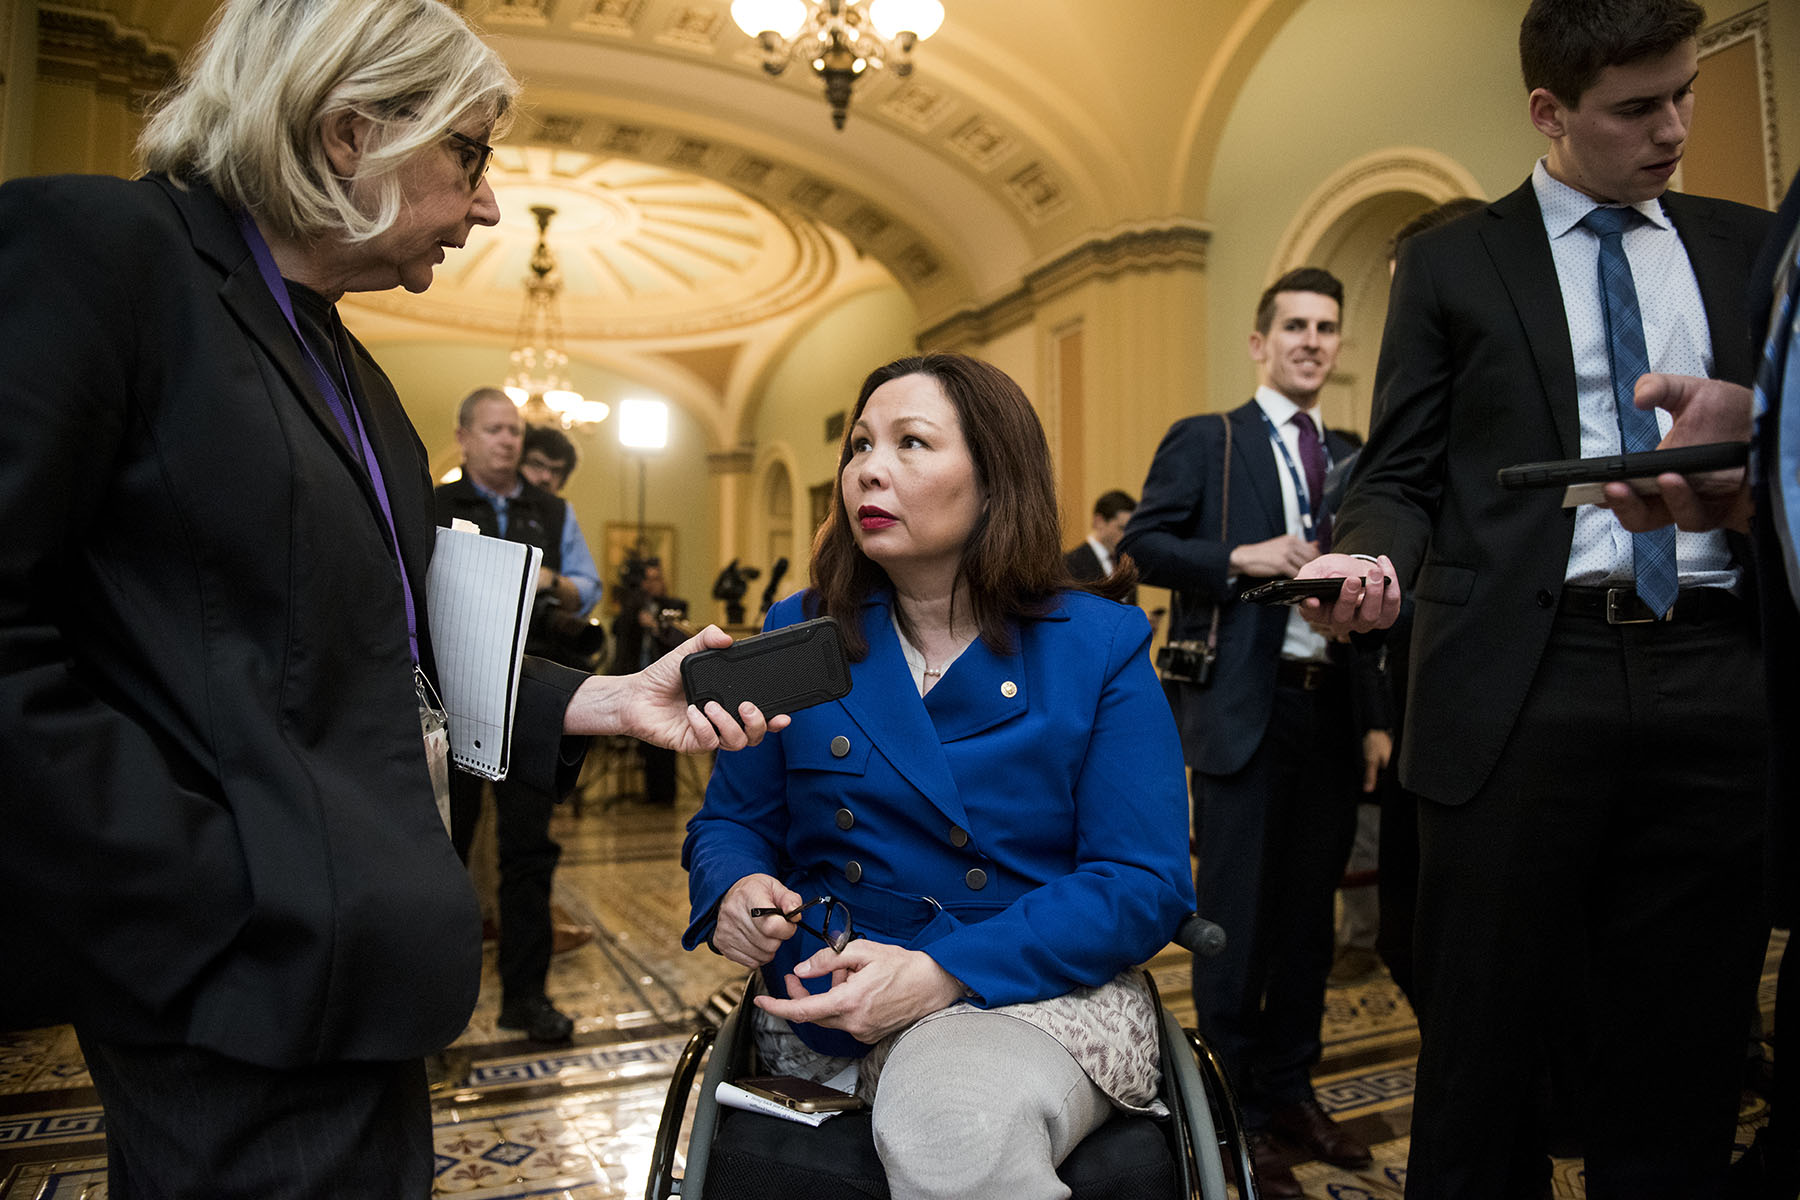 Tammy Duckworth speaks to members of the press on Capitol Hill.